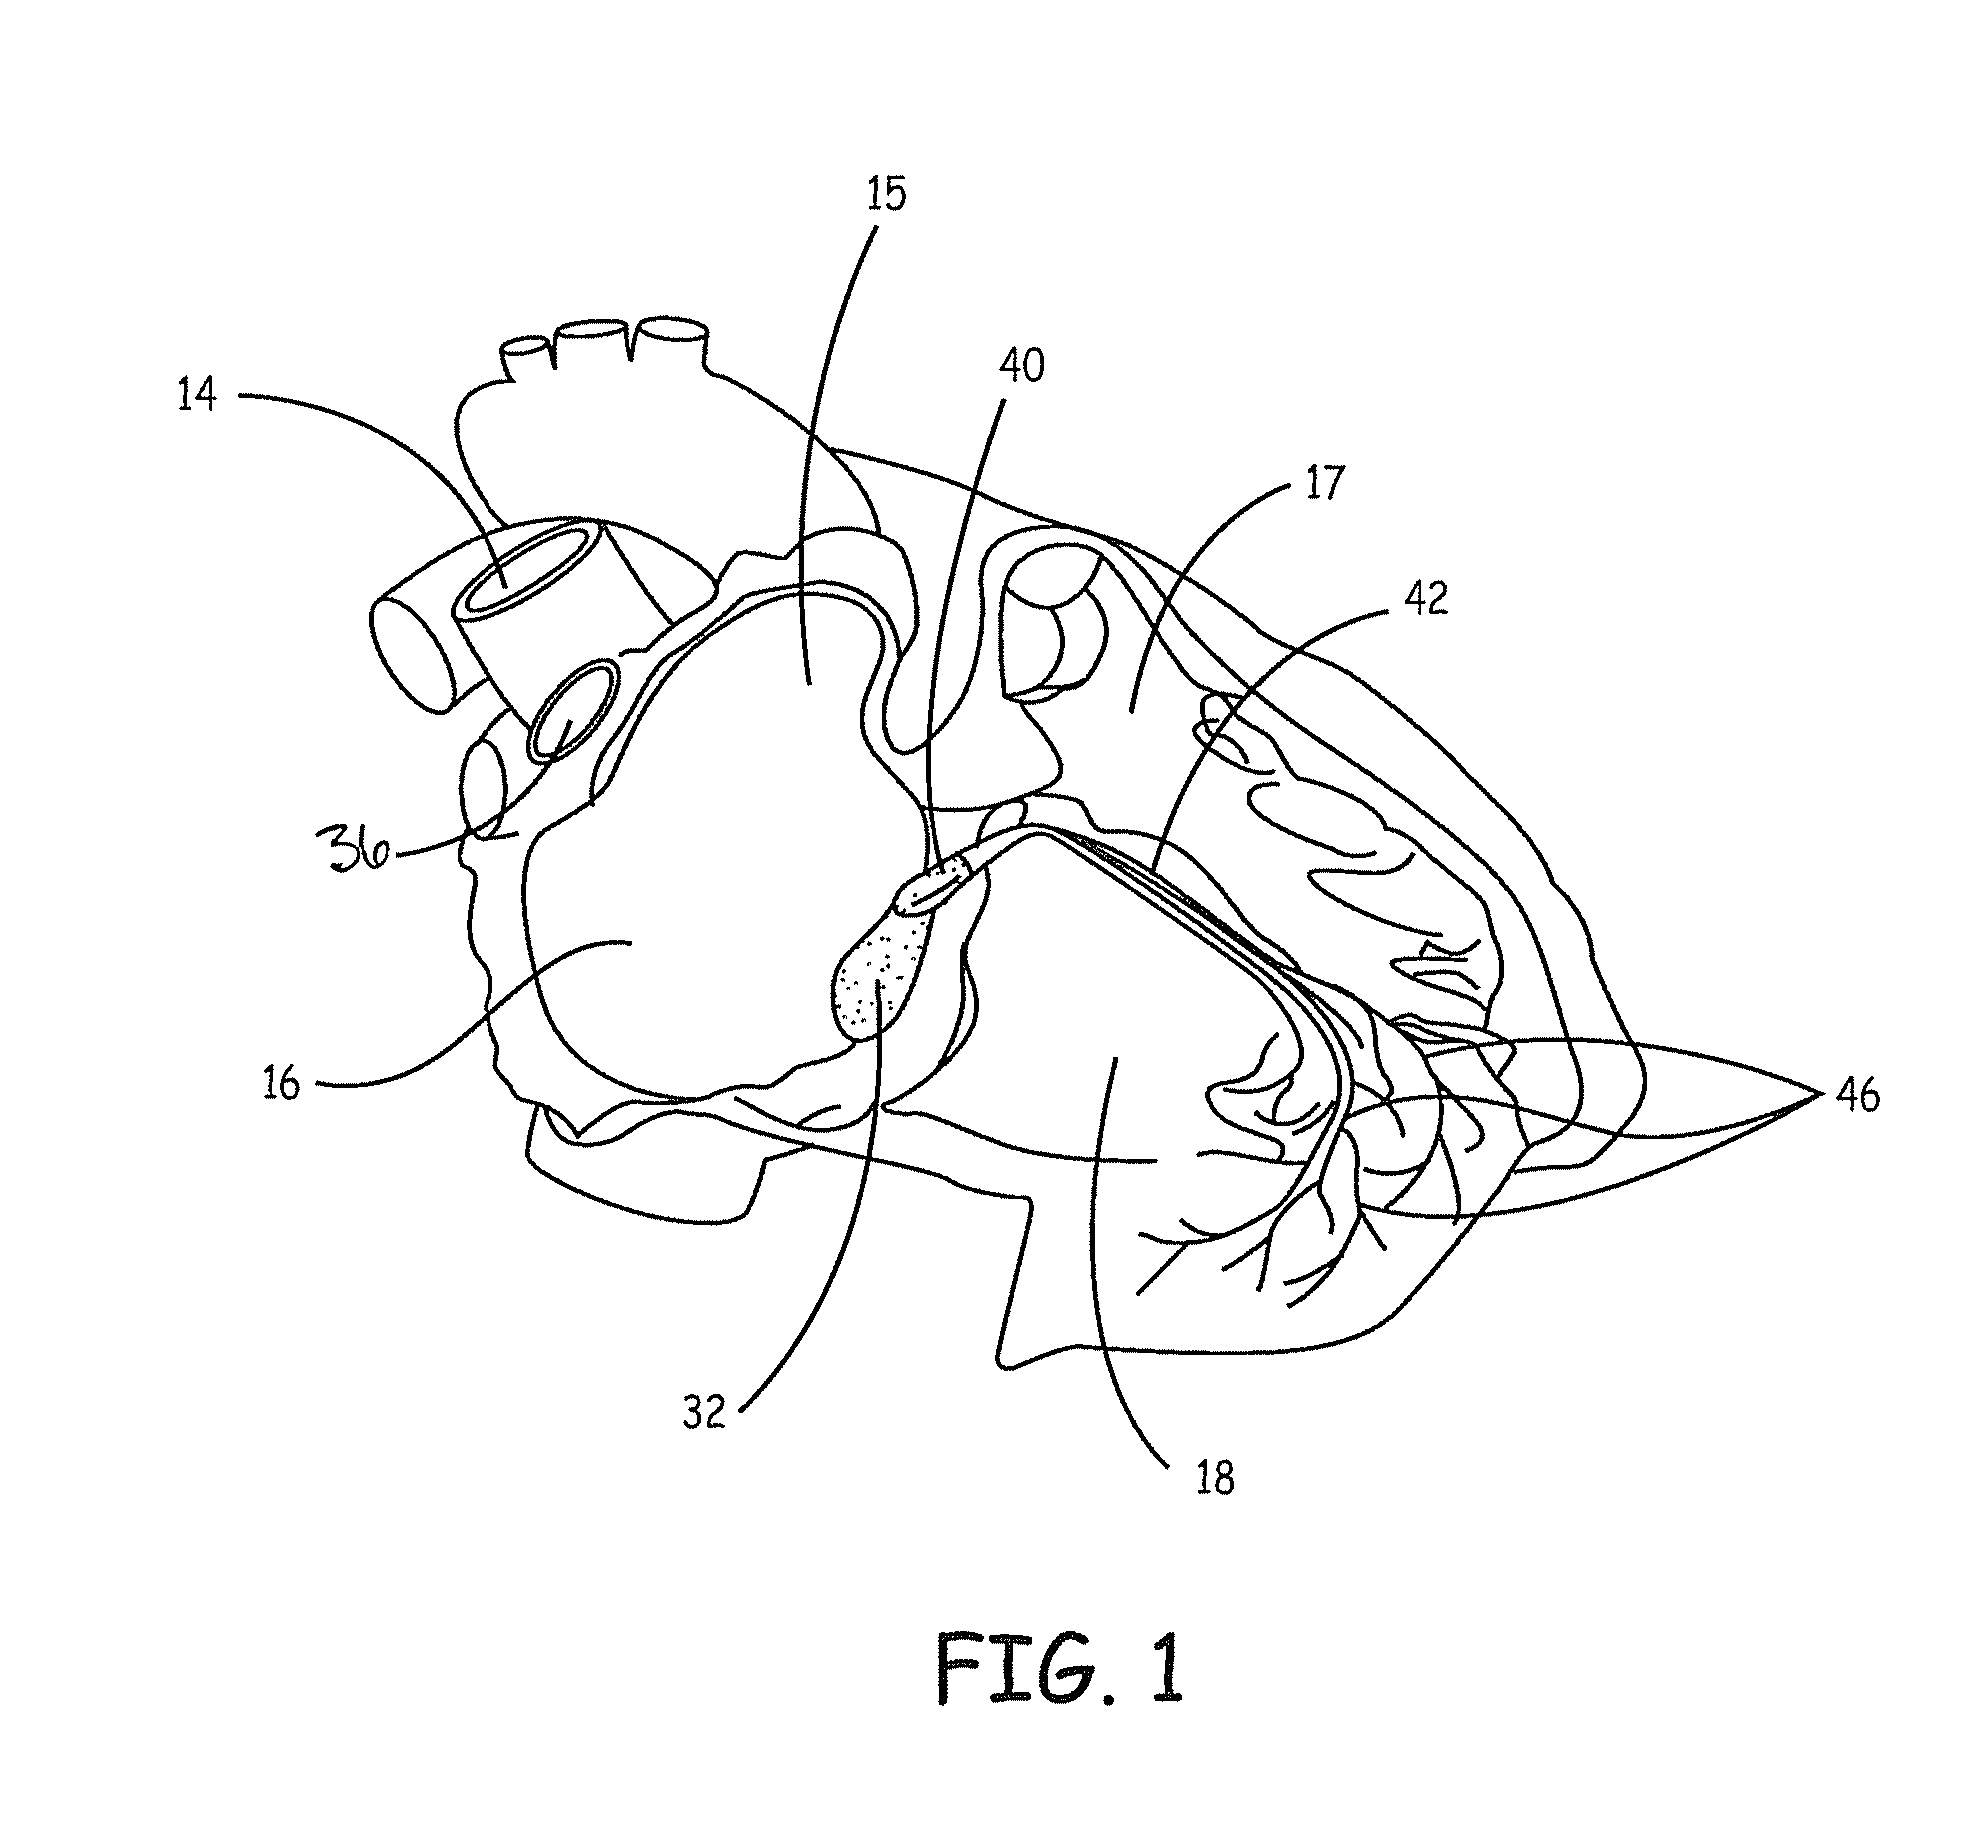 Biological pacemaker compositions and systems incorporating interstitial cells of cajal